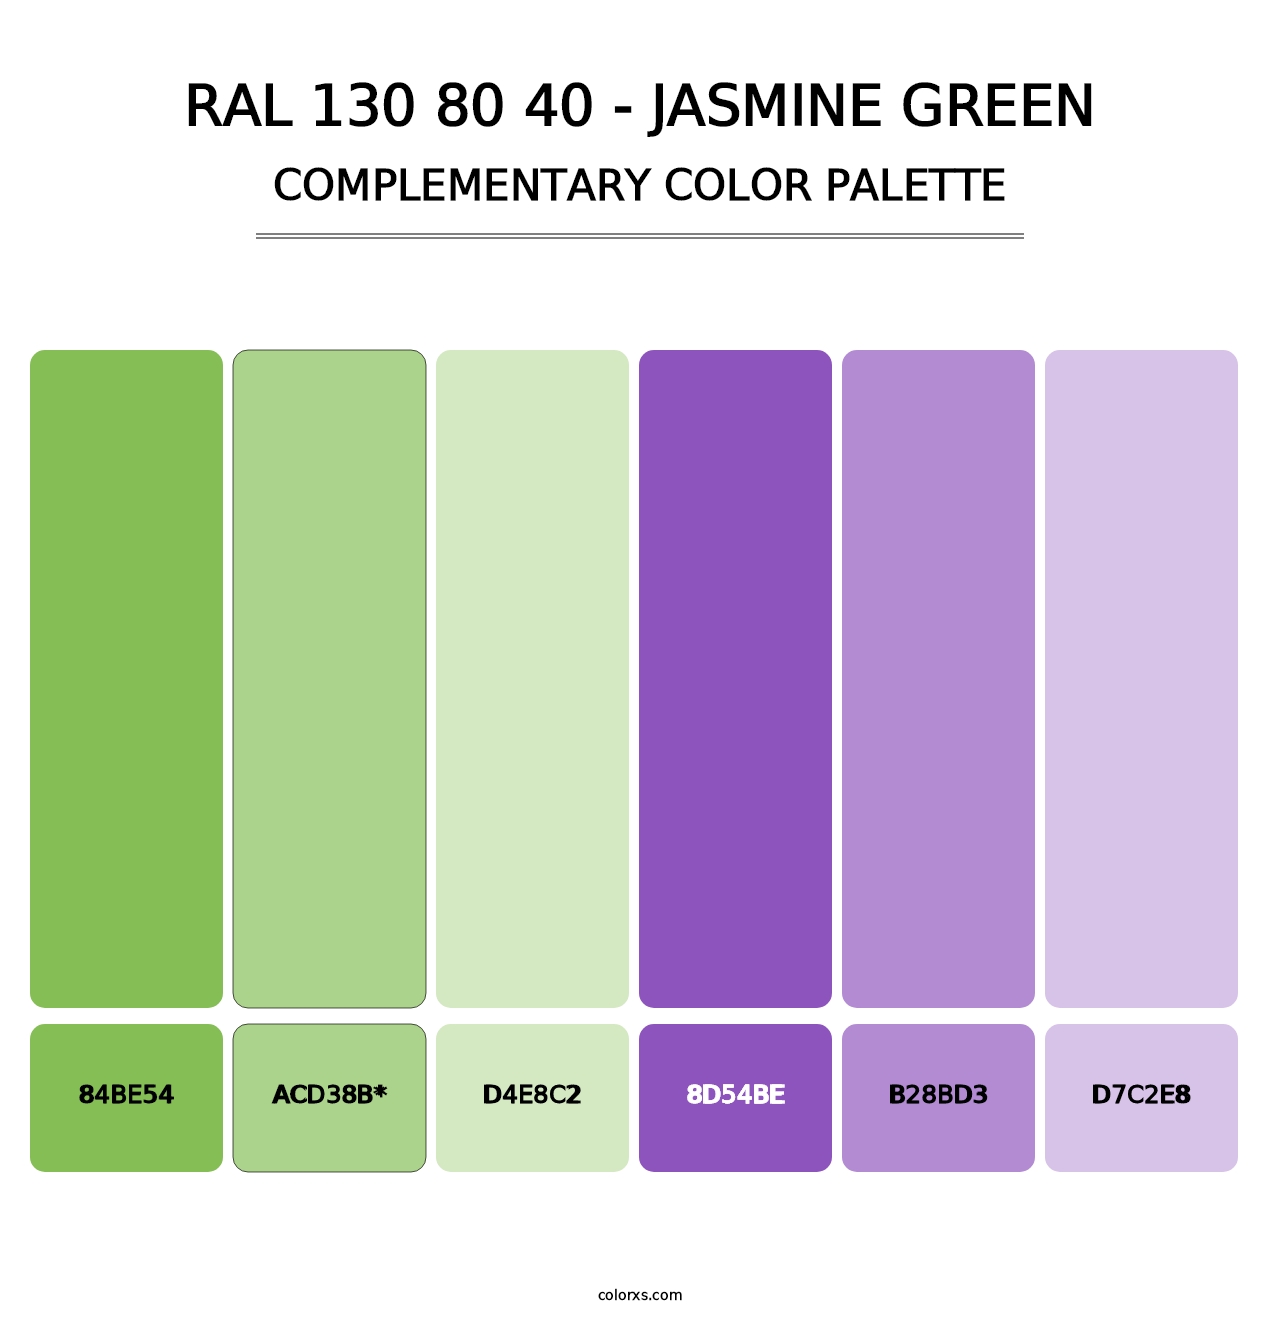 RAL 130 80 40 - Jasmine Green - Complementary Color Palette